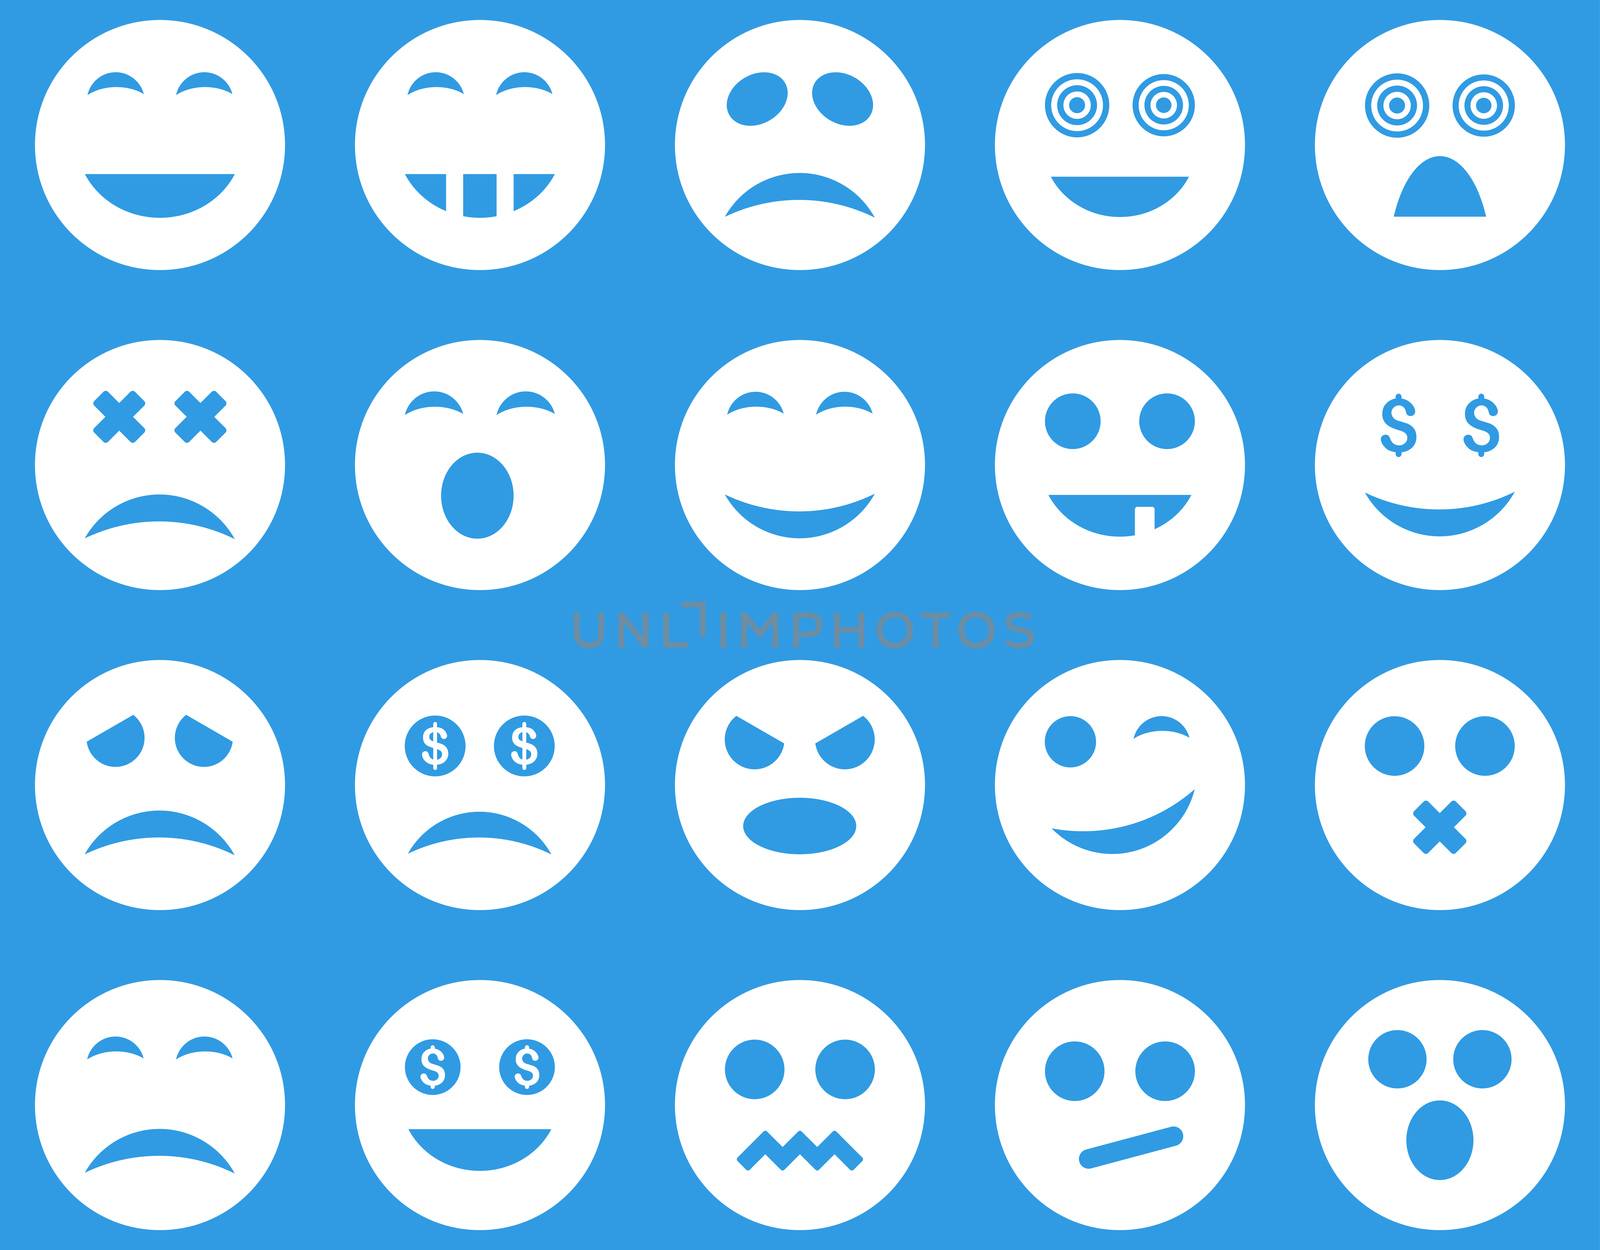 Smile and emotion icons. Glyph set style is flat images, white symbols, isolated on a blue background.